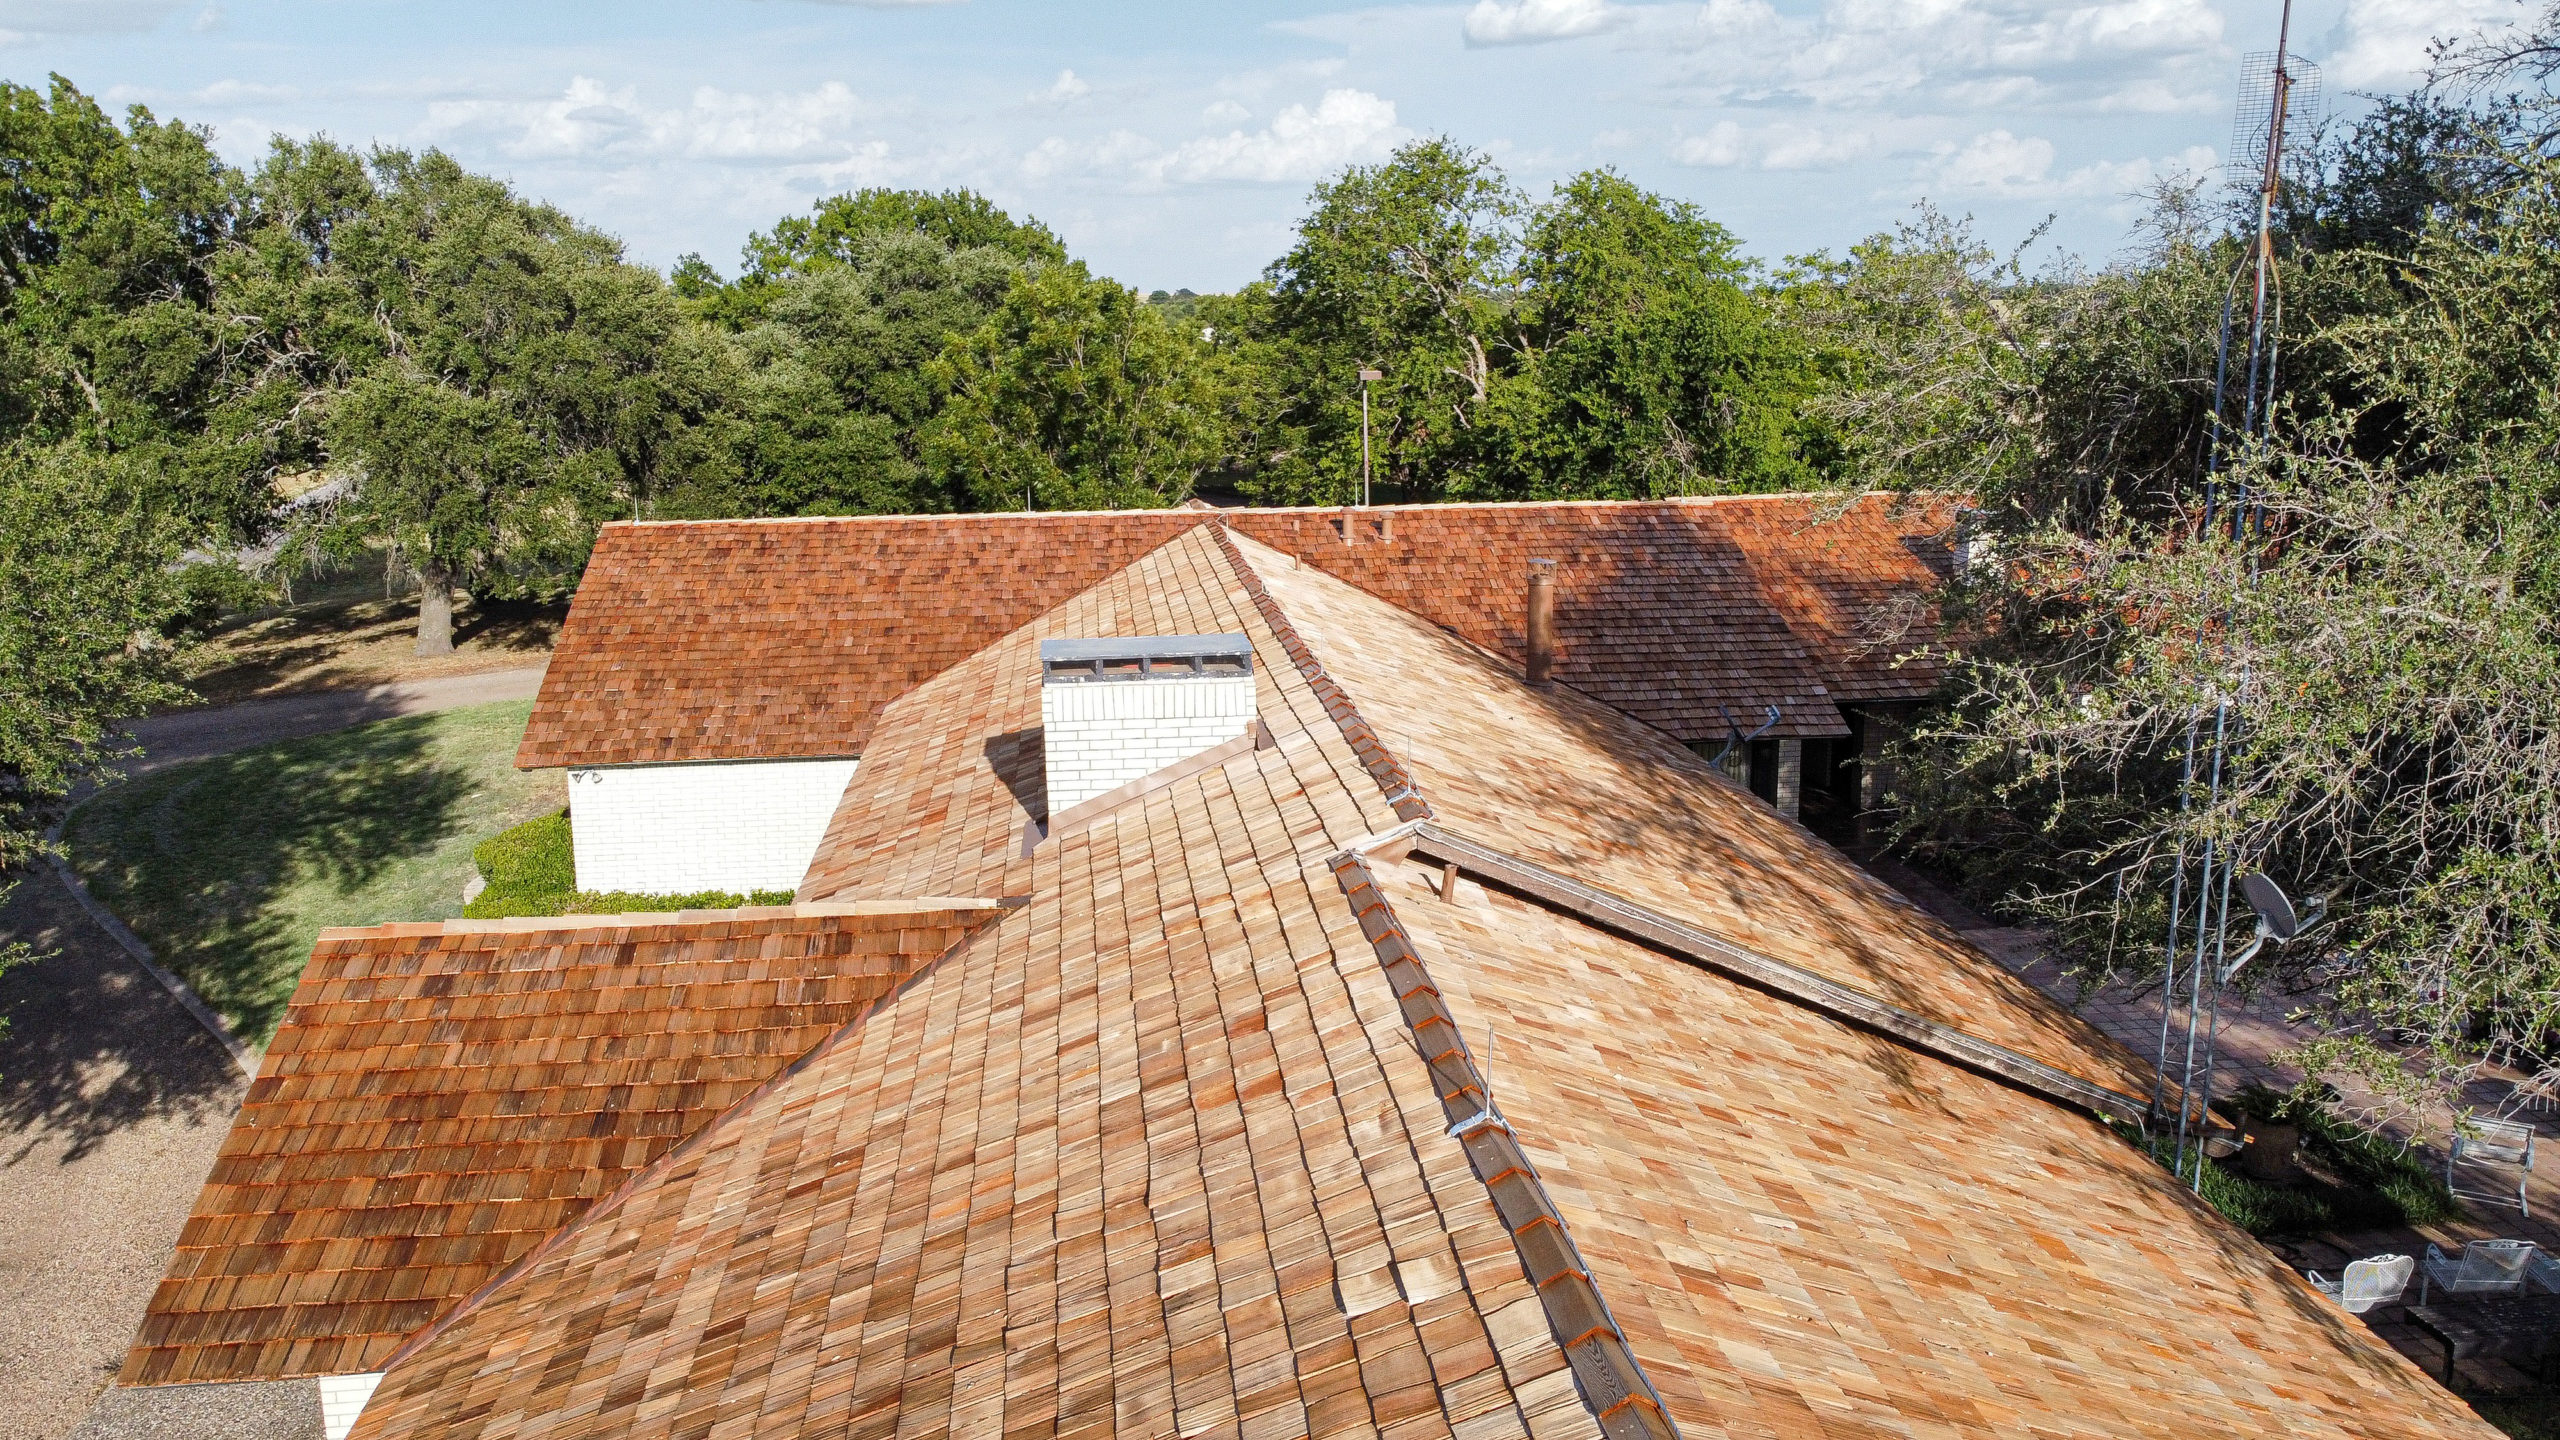 Cedar Roof replaced by Whitish Roofing in Rodger TX and Central Texas roofer.